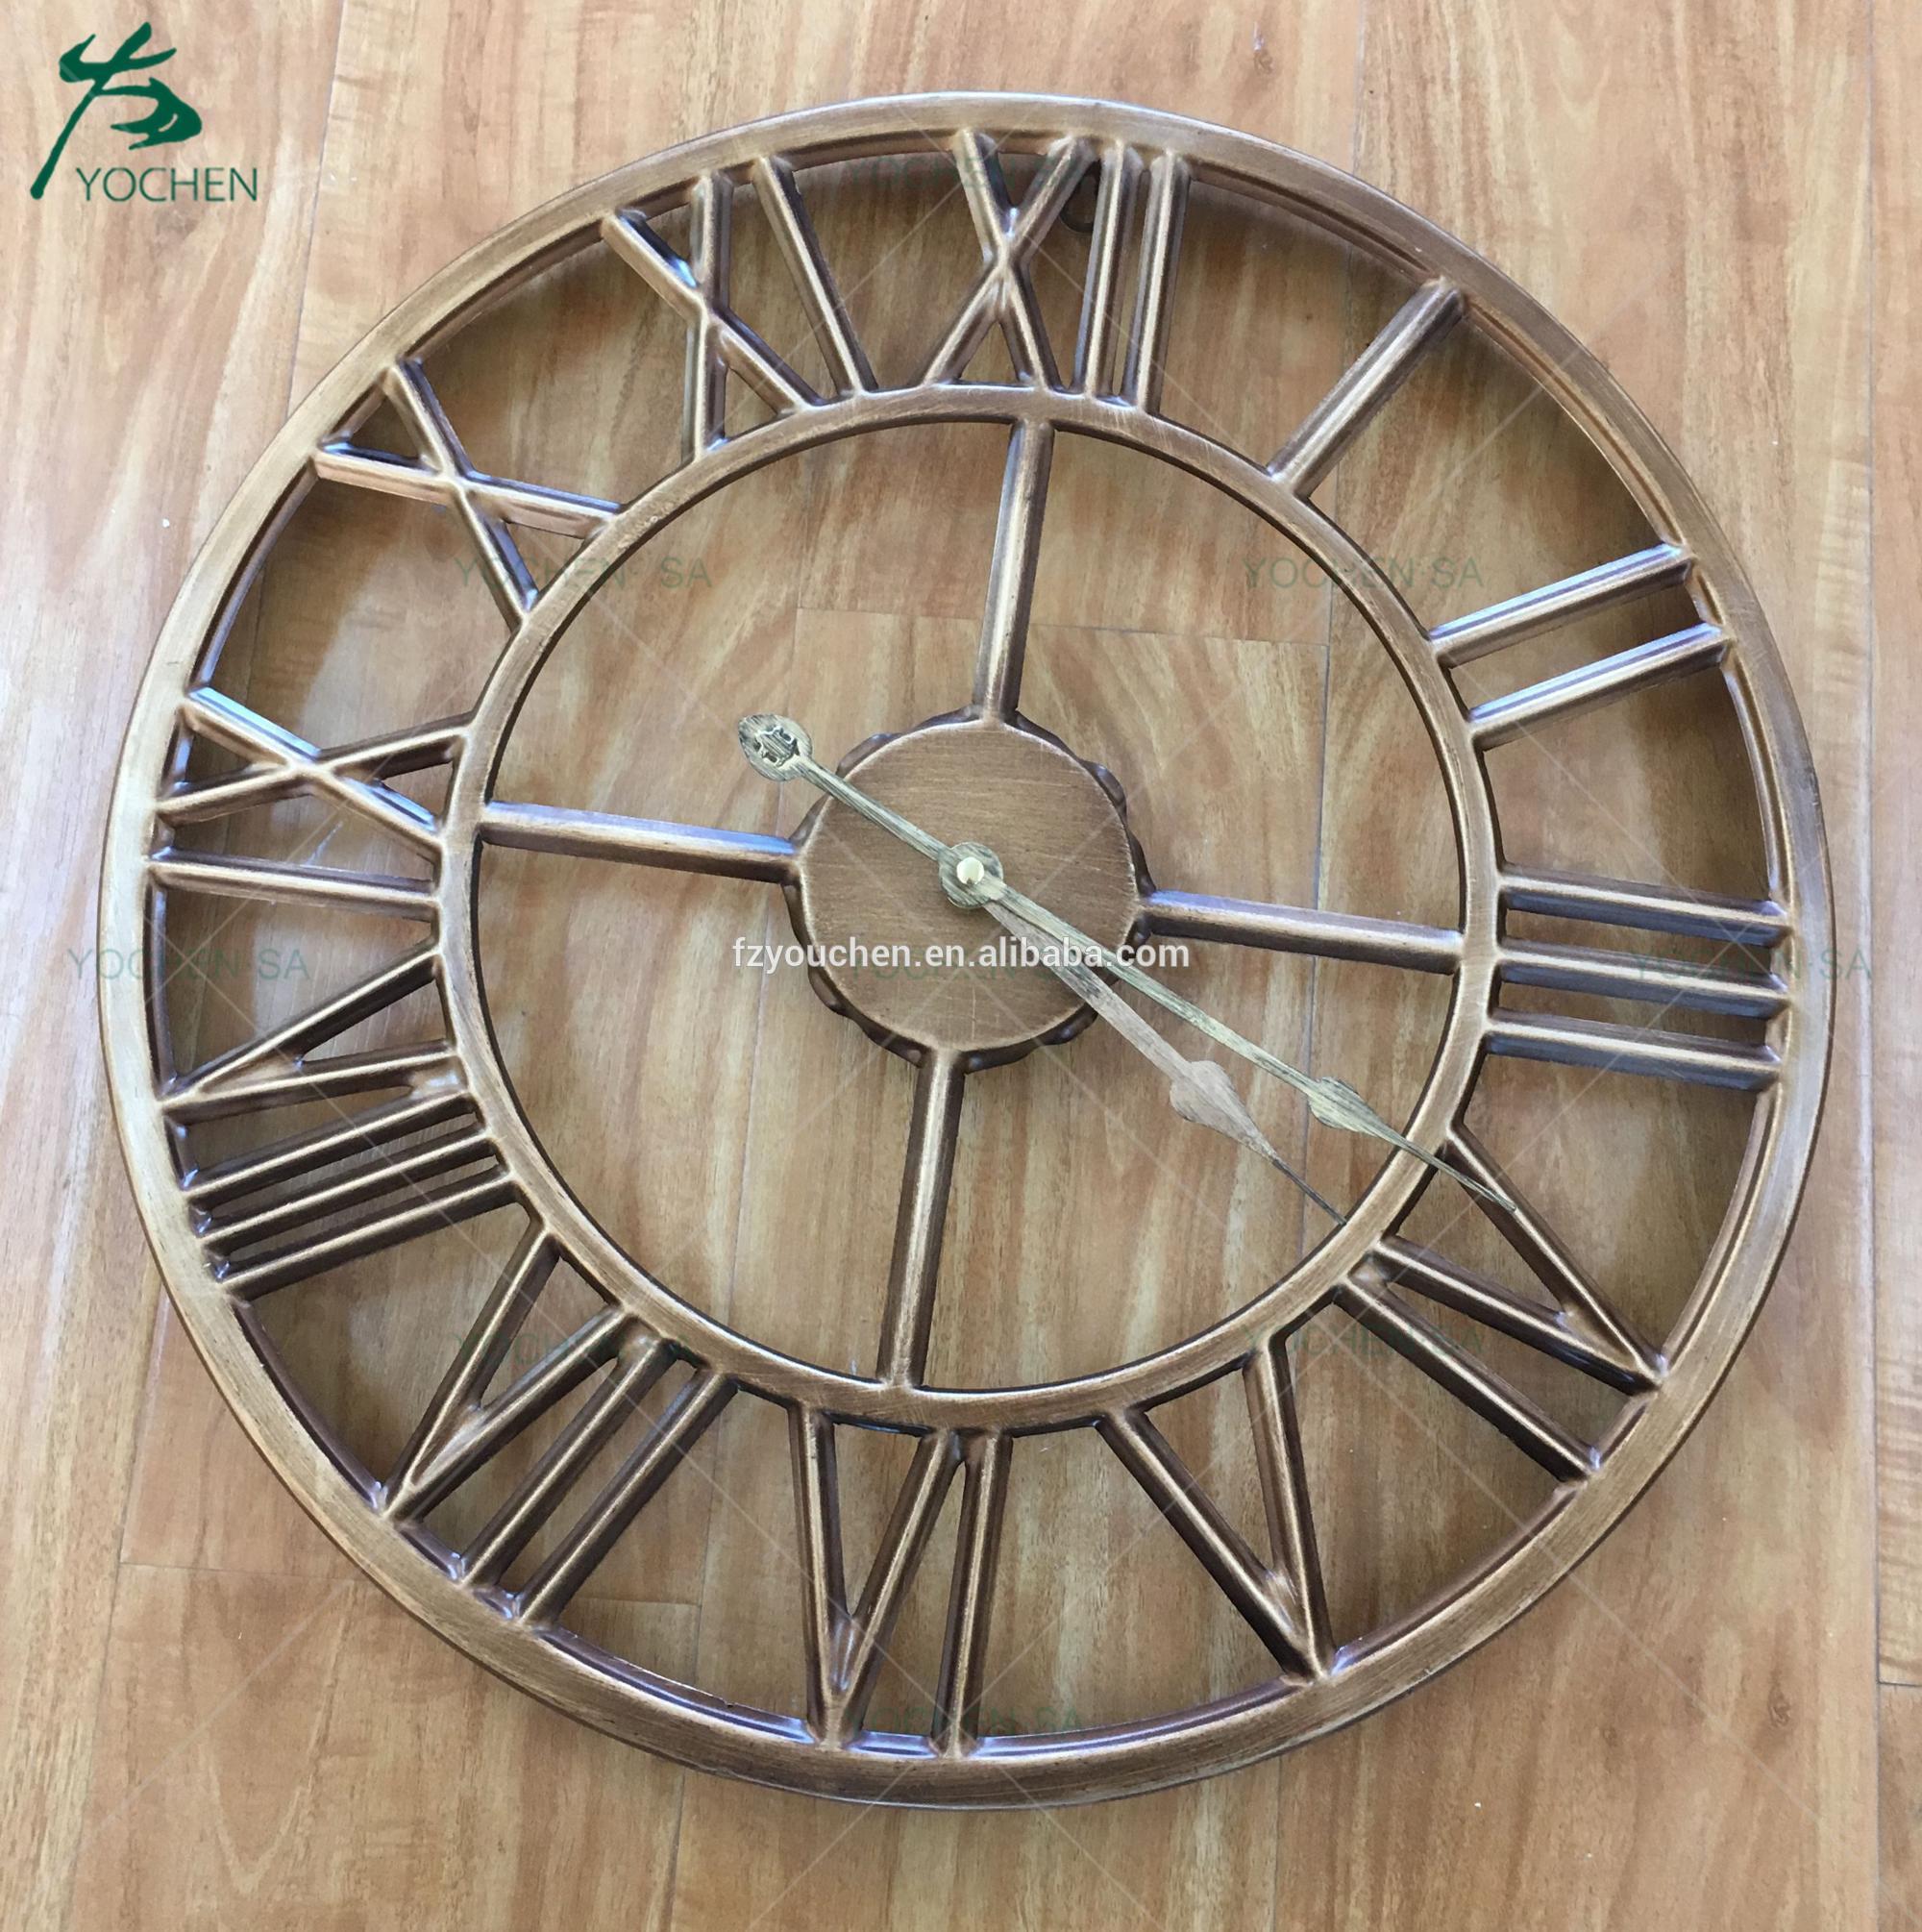 Antique Gold Metal Round Wall Clock Home Decoration